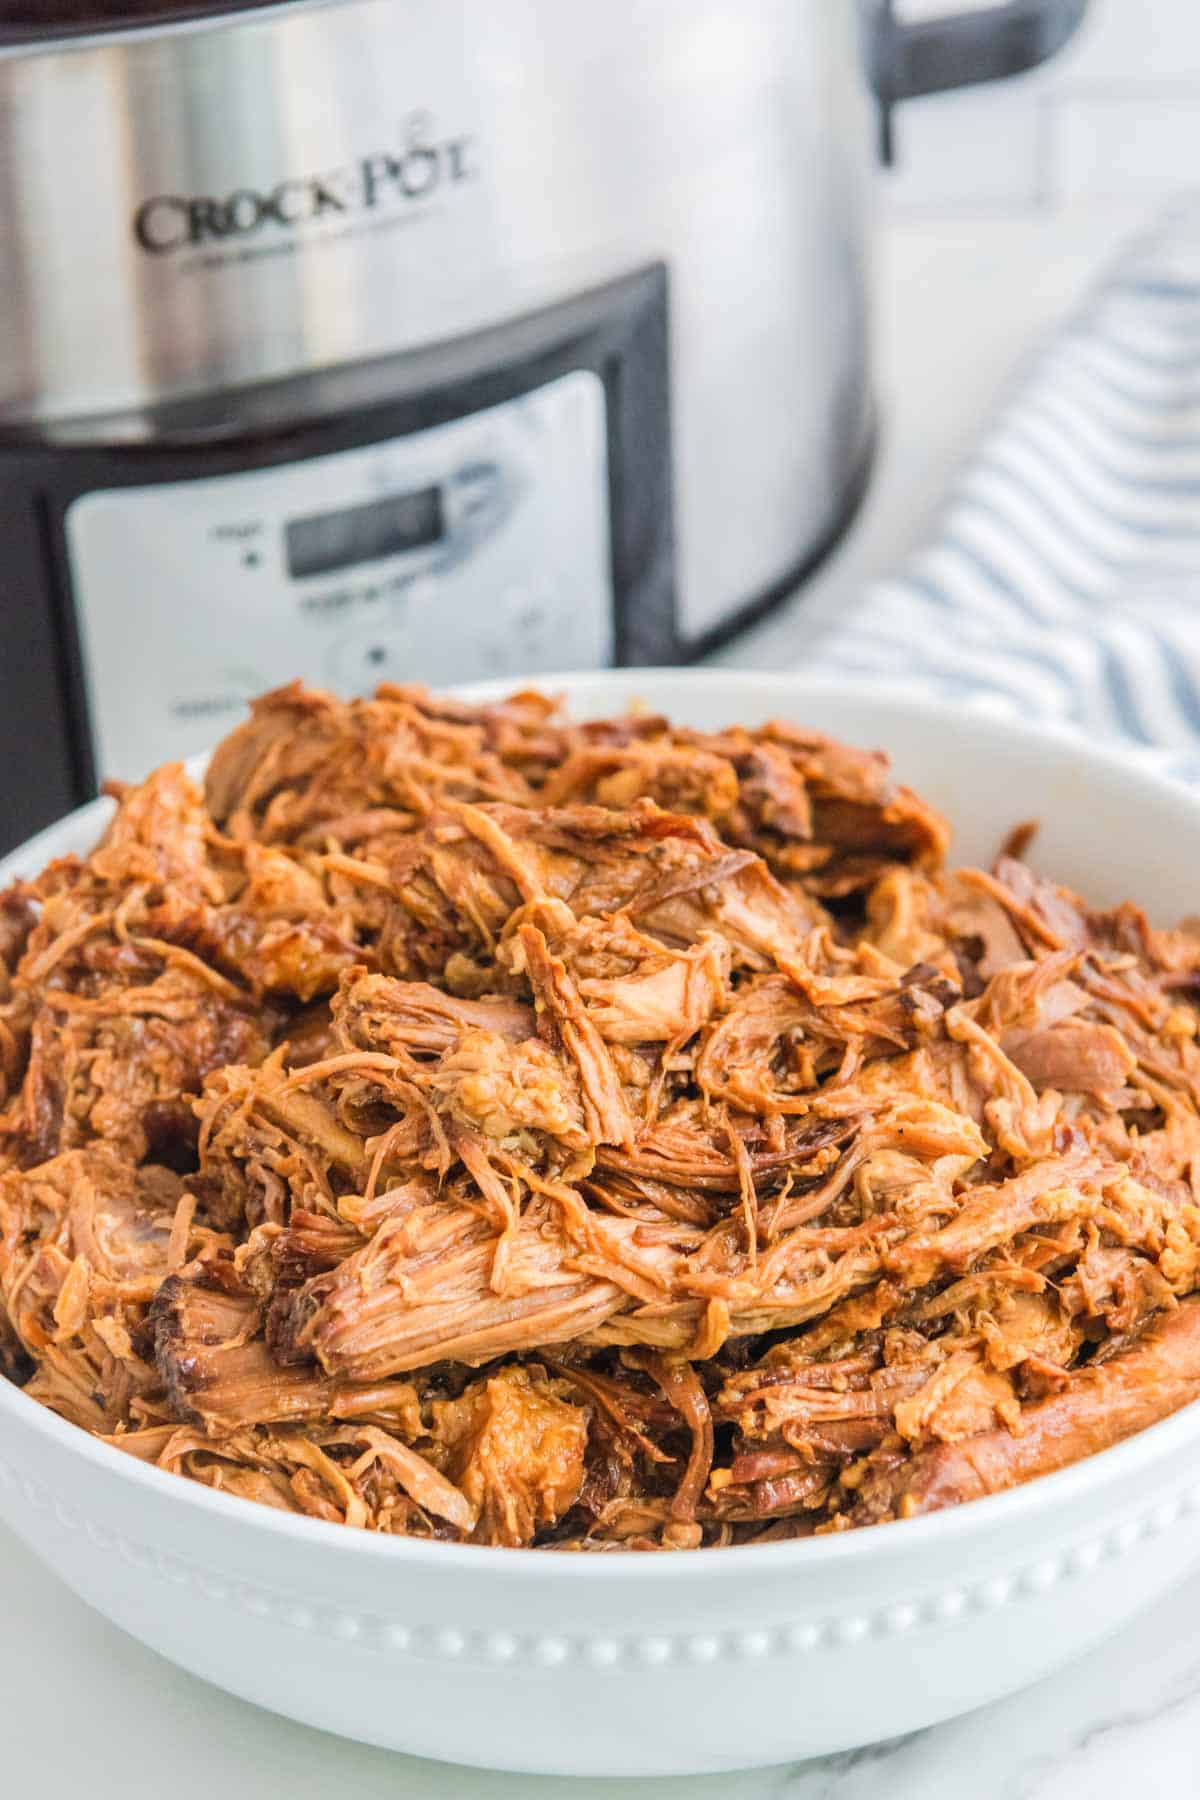 Slow cooker pulled pork with BBQ sauce in a bowl and a Crockpot.